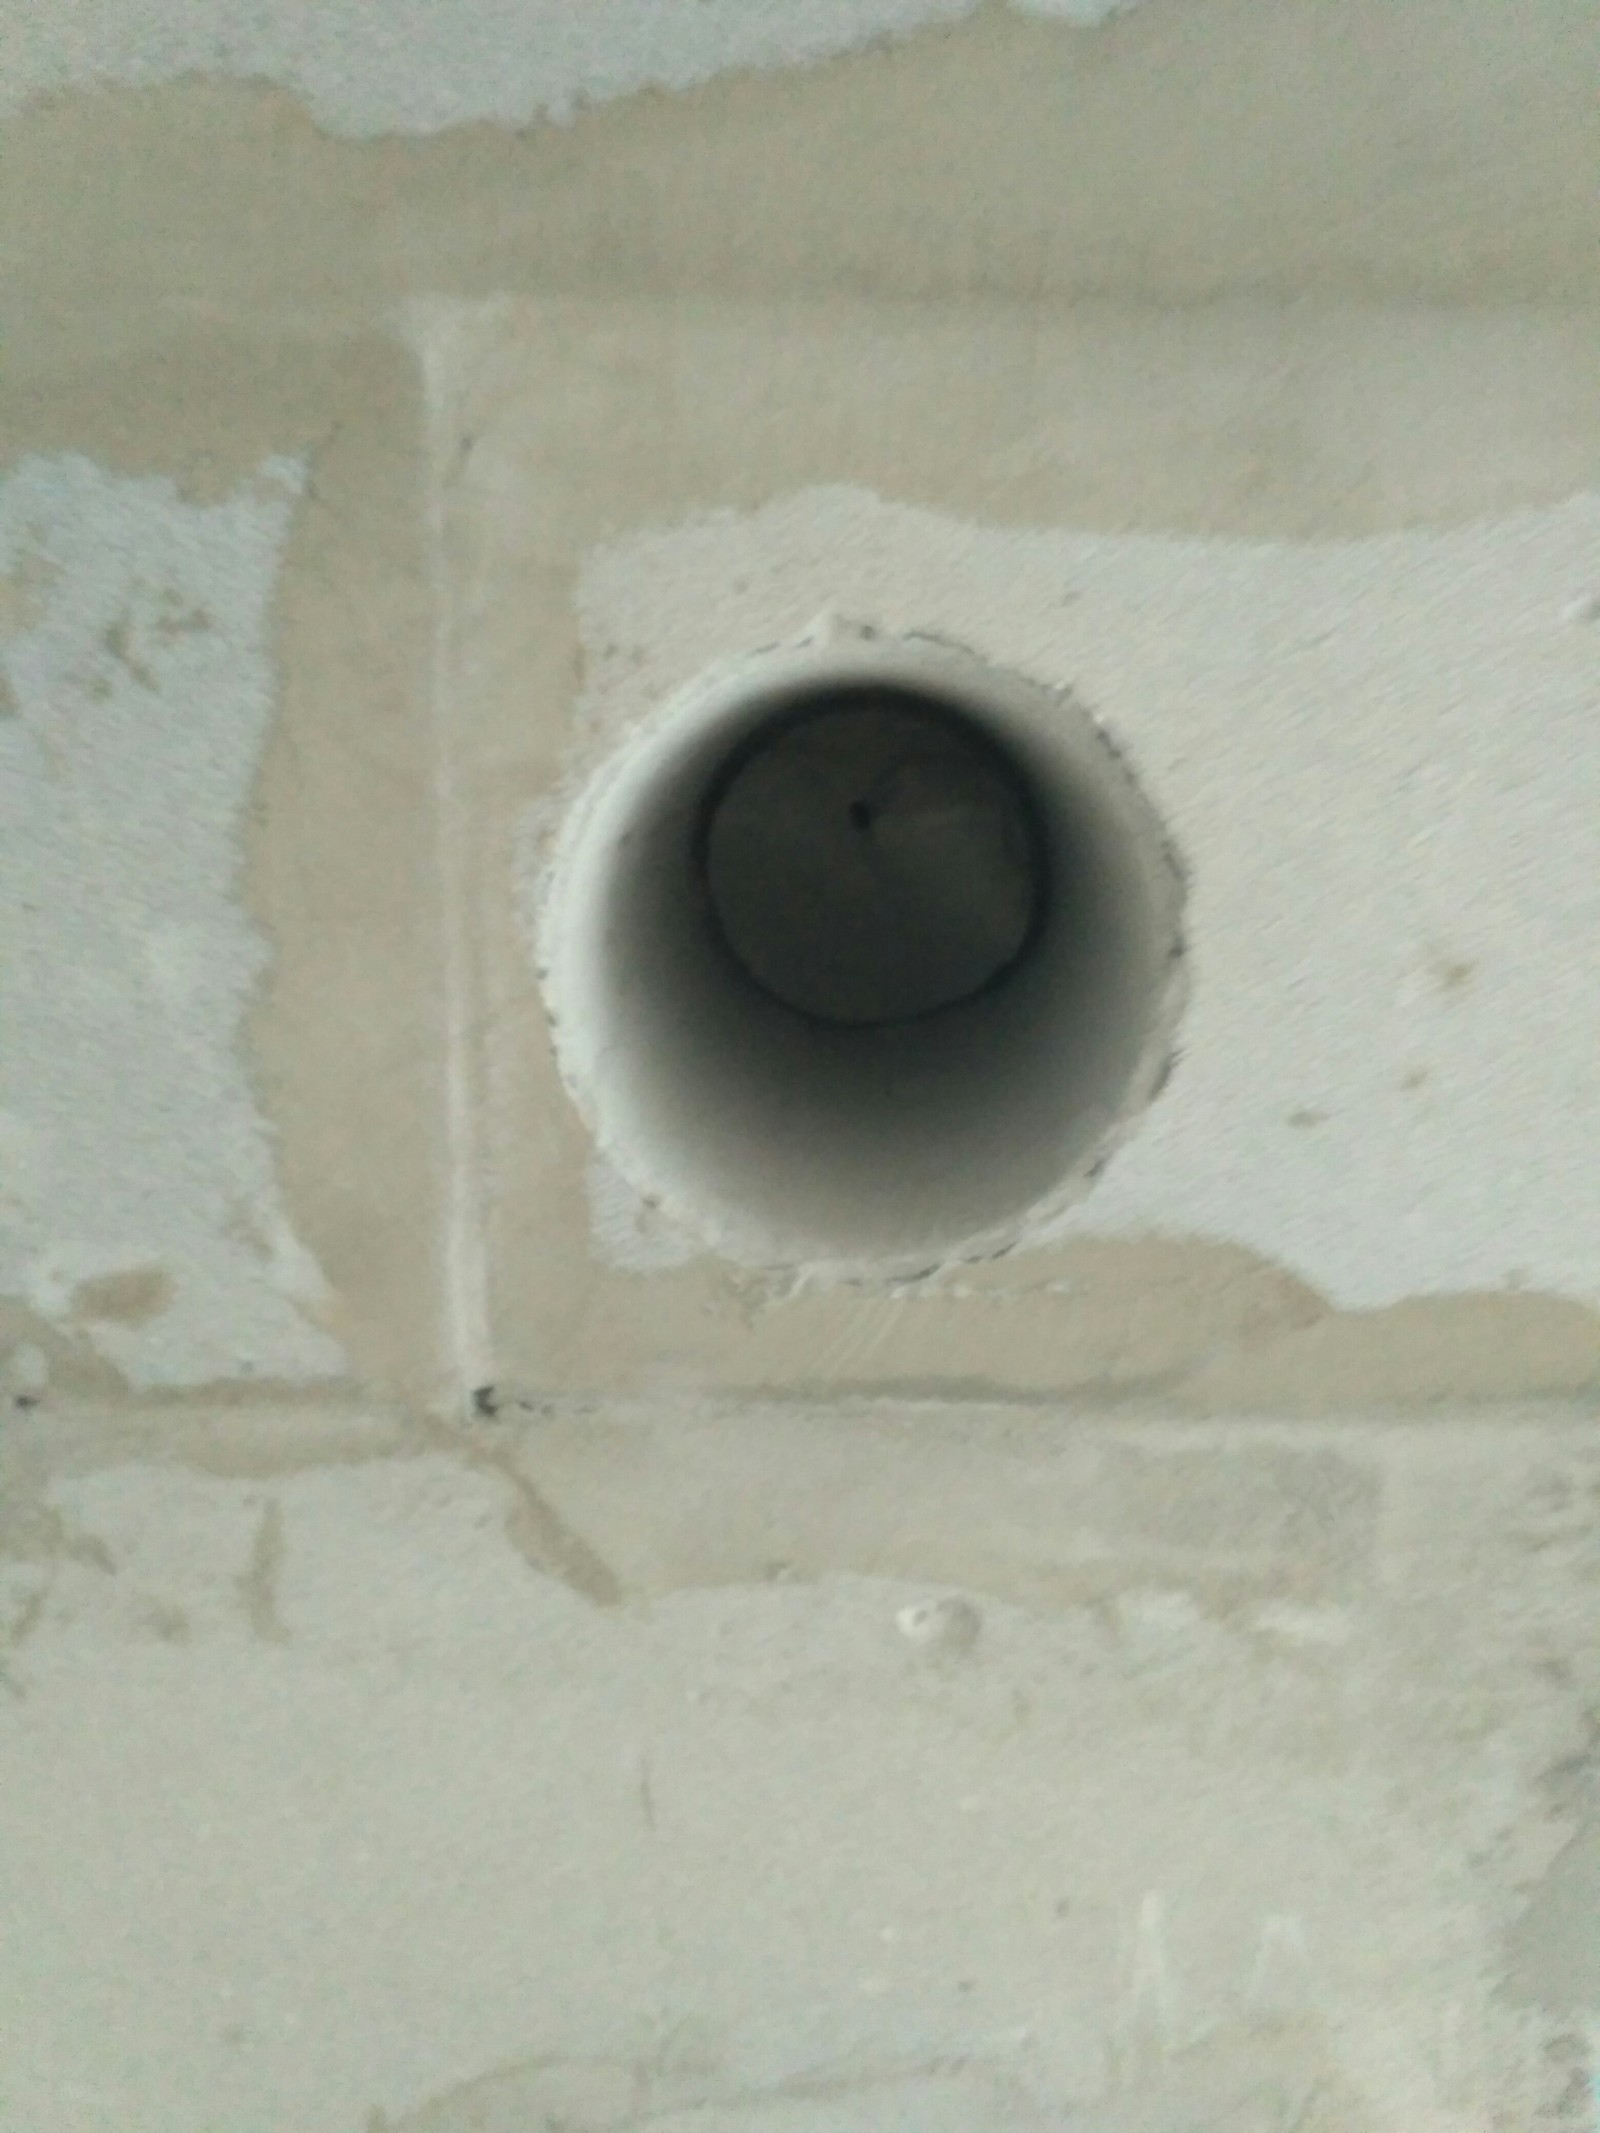 Homemade crown on a gas block - Crown, Aerated concrete, Hole, Heating, Homemade, Longpost